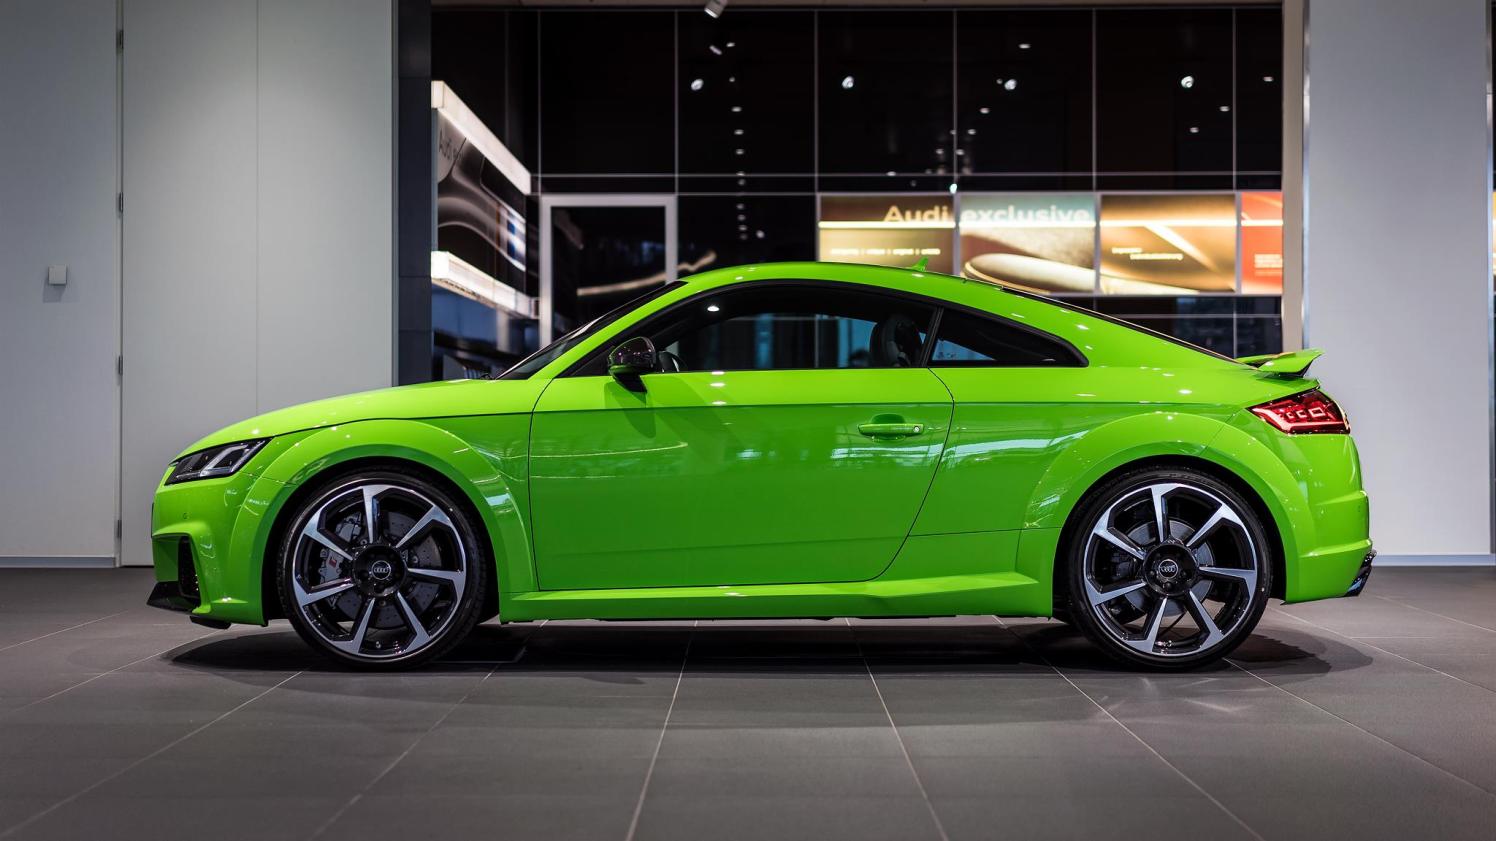 2017-audi-tt-rs-in-lime-green-looks-like-a-tiny-exotic-car_11